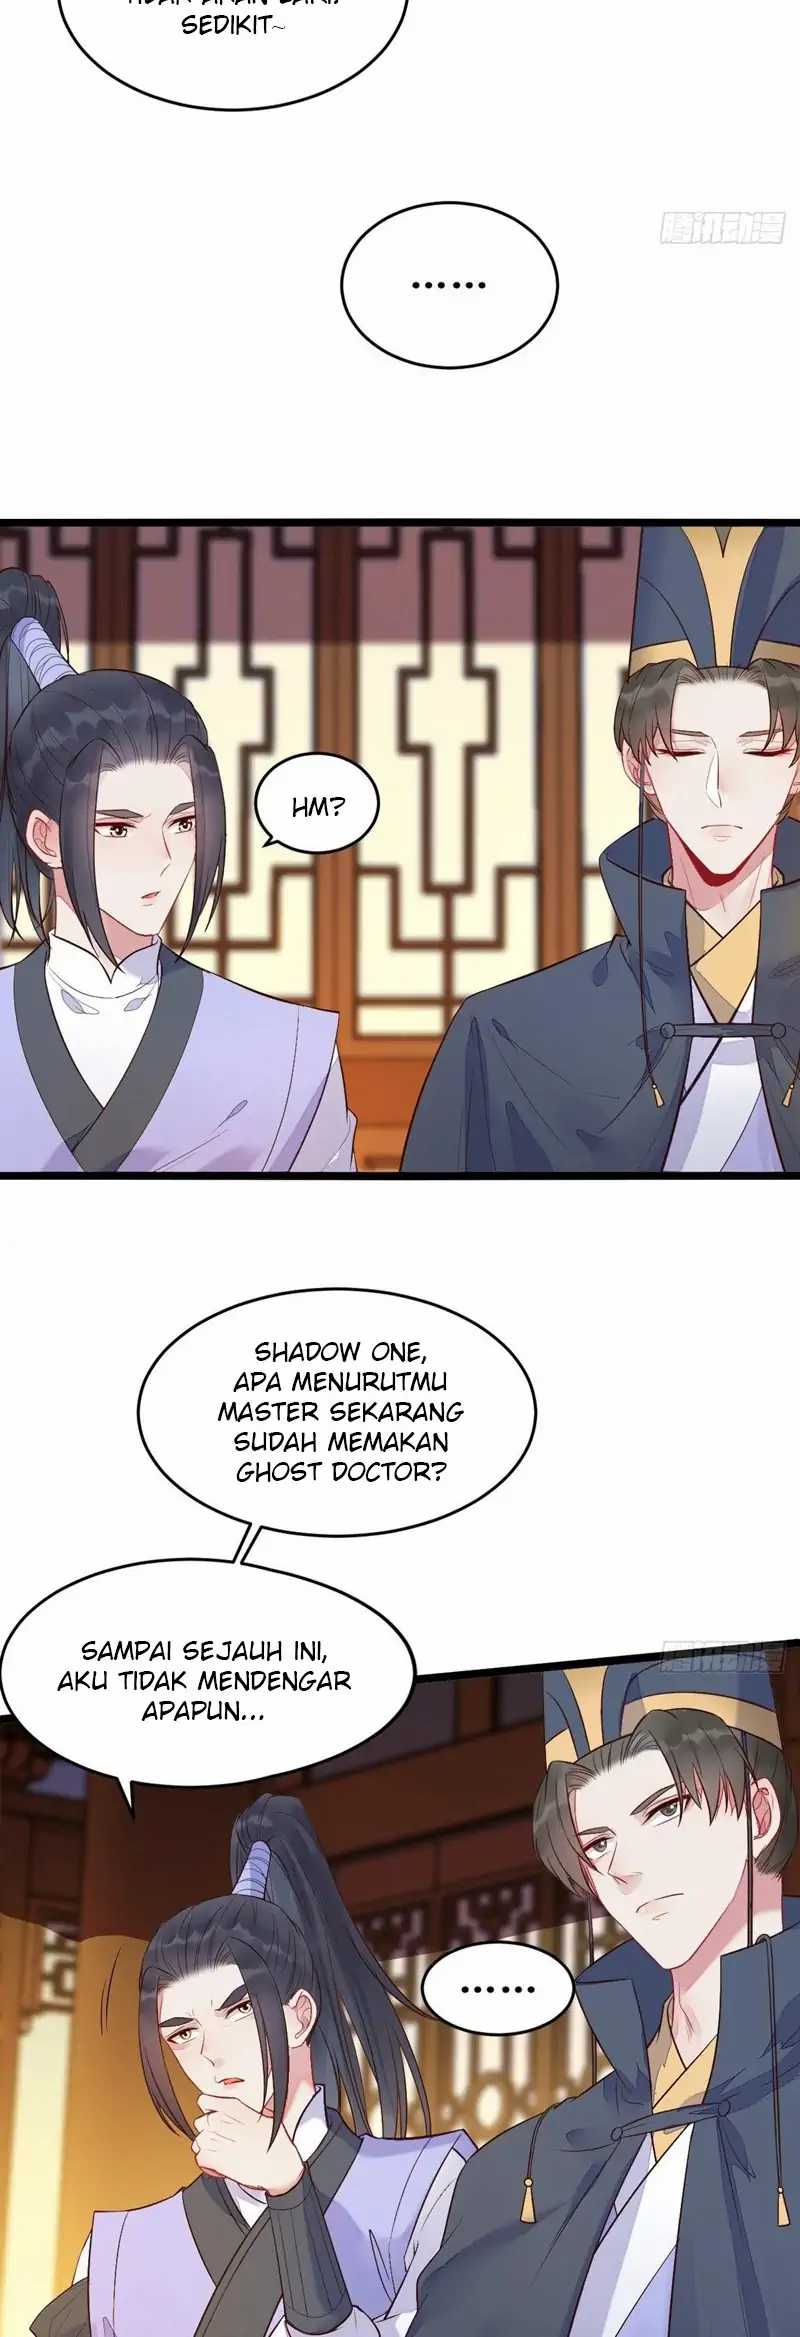 The Ghostly Doctor Chapter 481